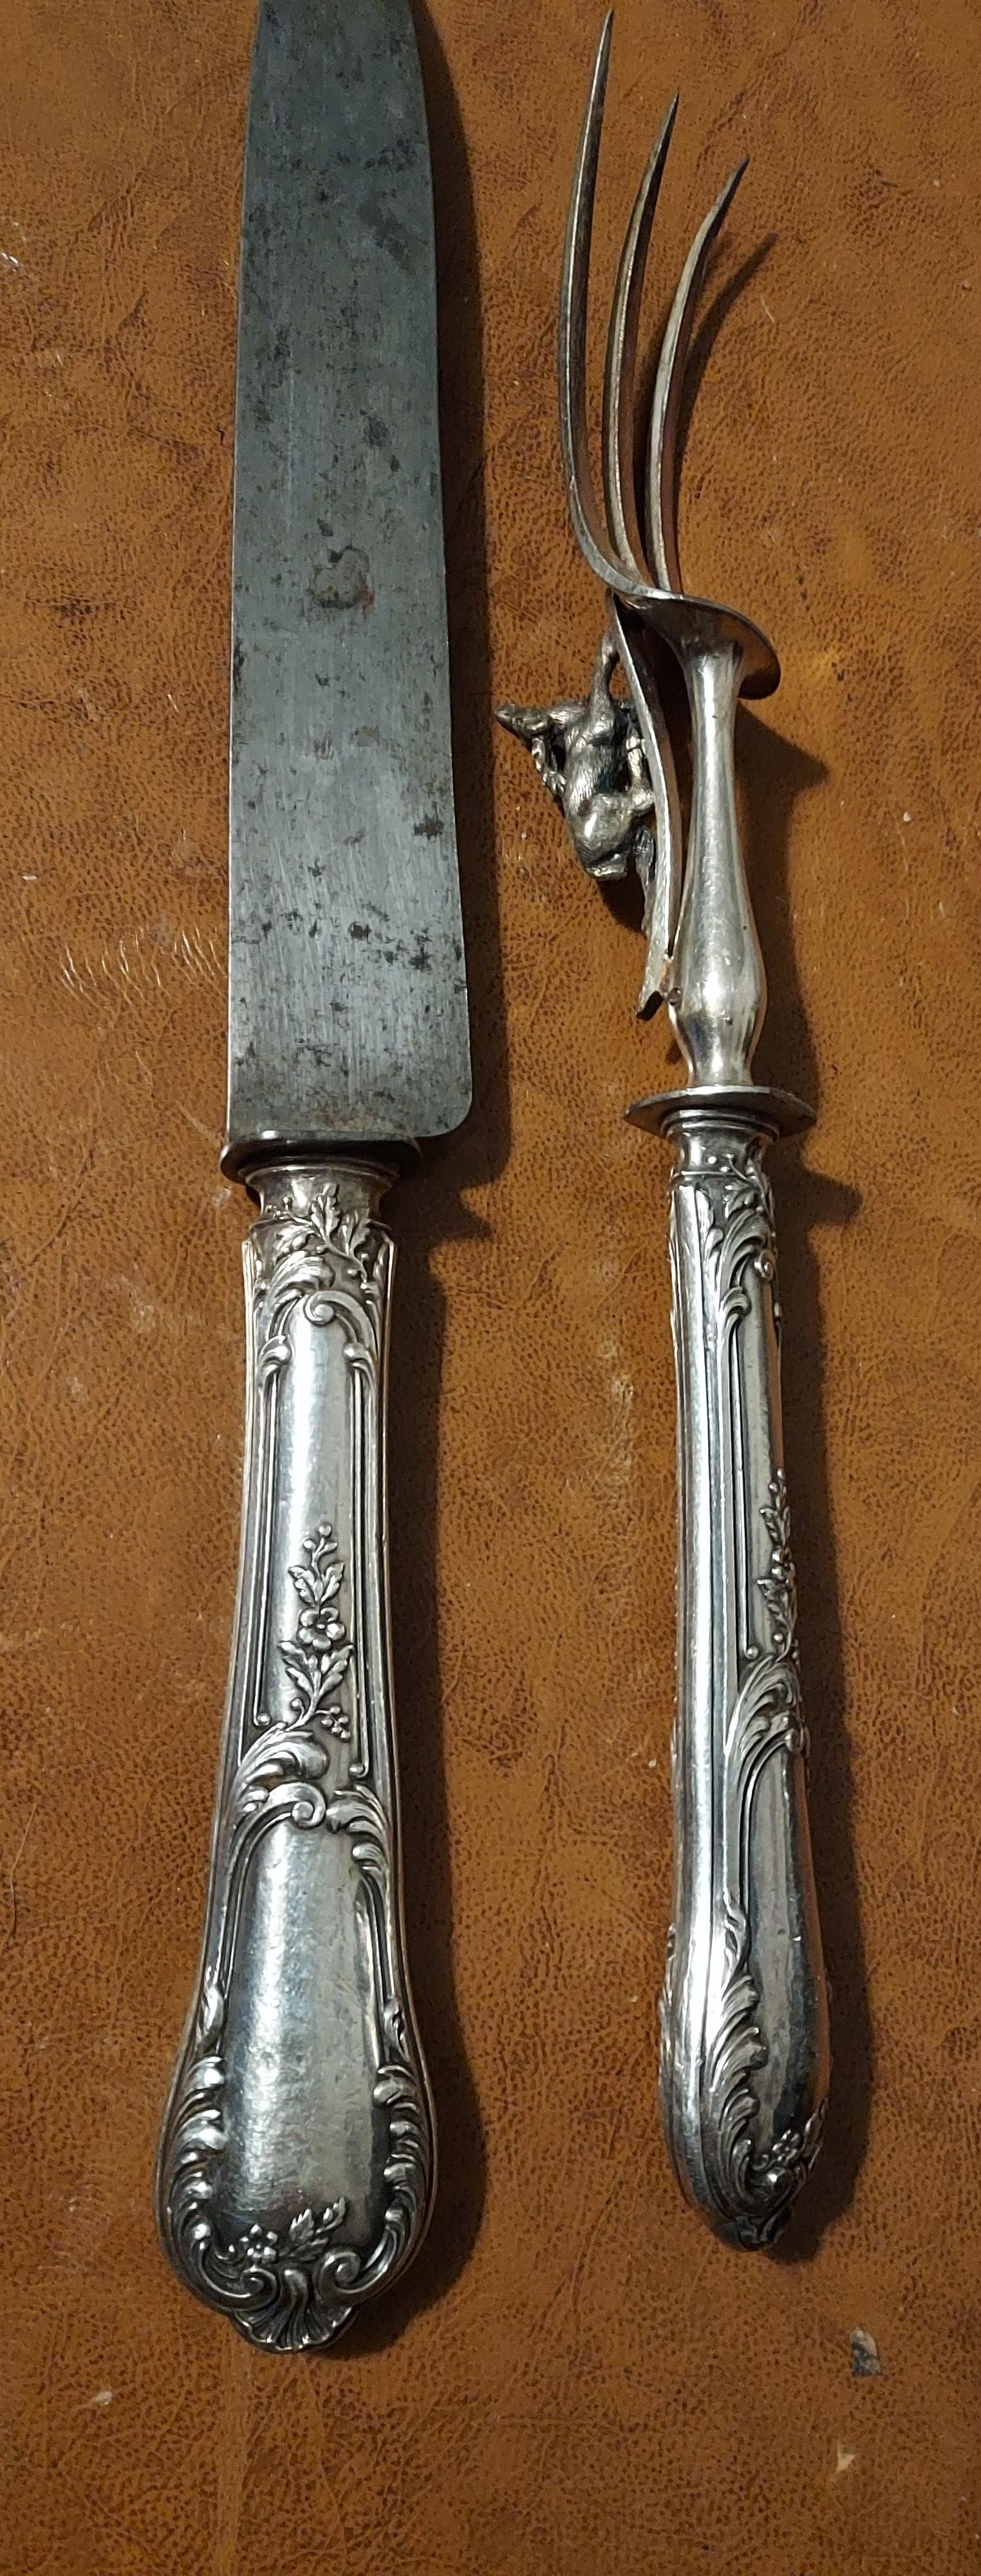 19th Century Antique Silver Carving Set of Knofe and Fork embellished with a protective Stag For Sale